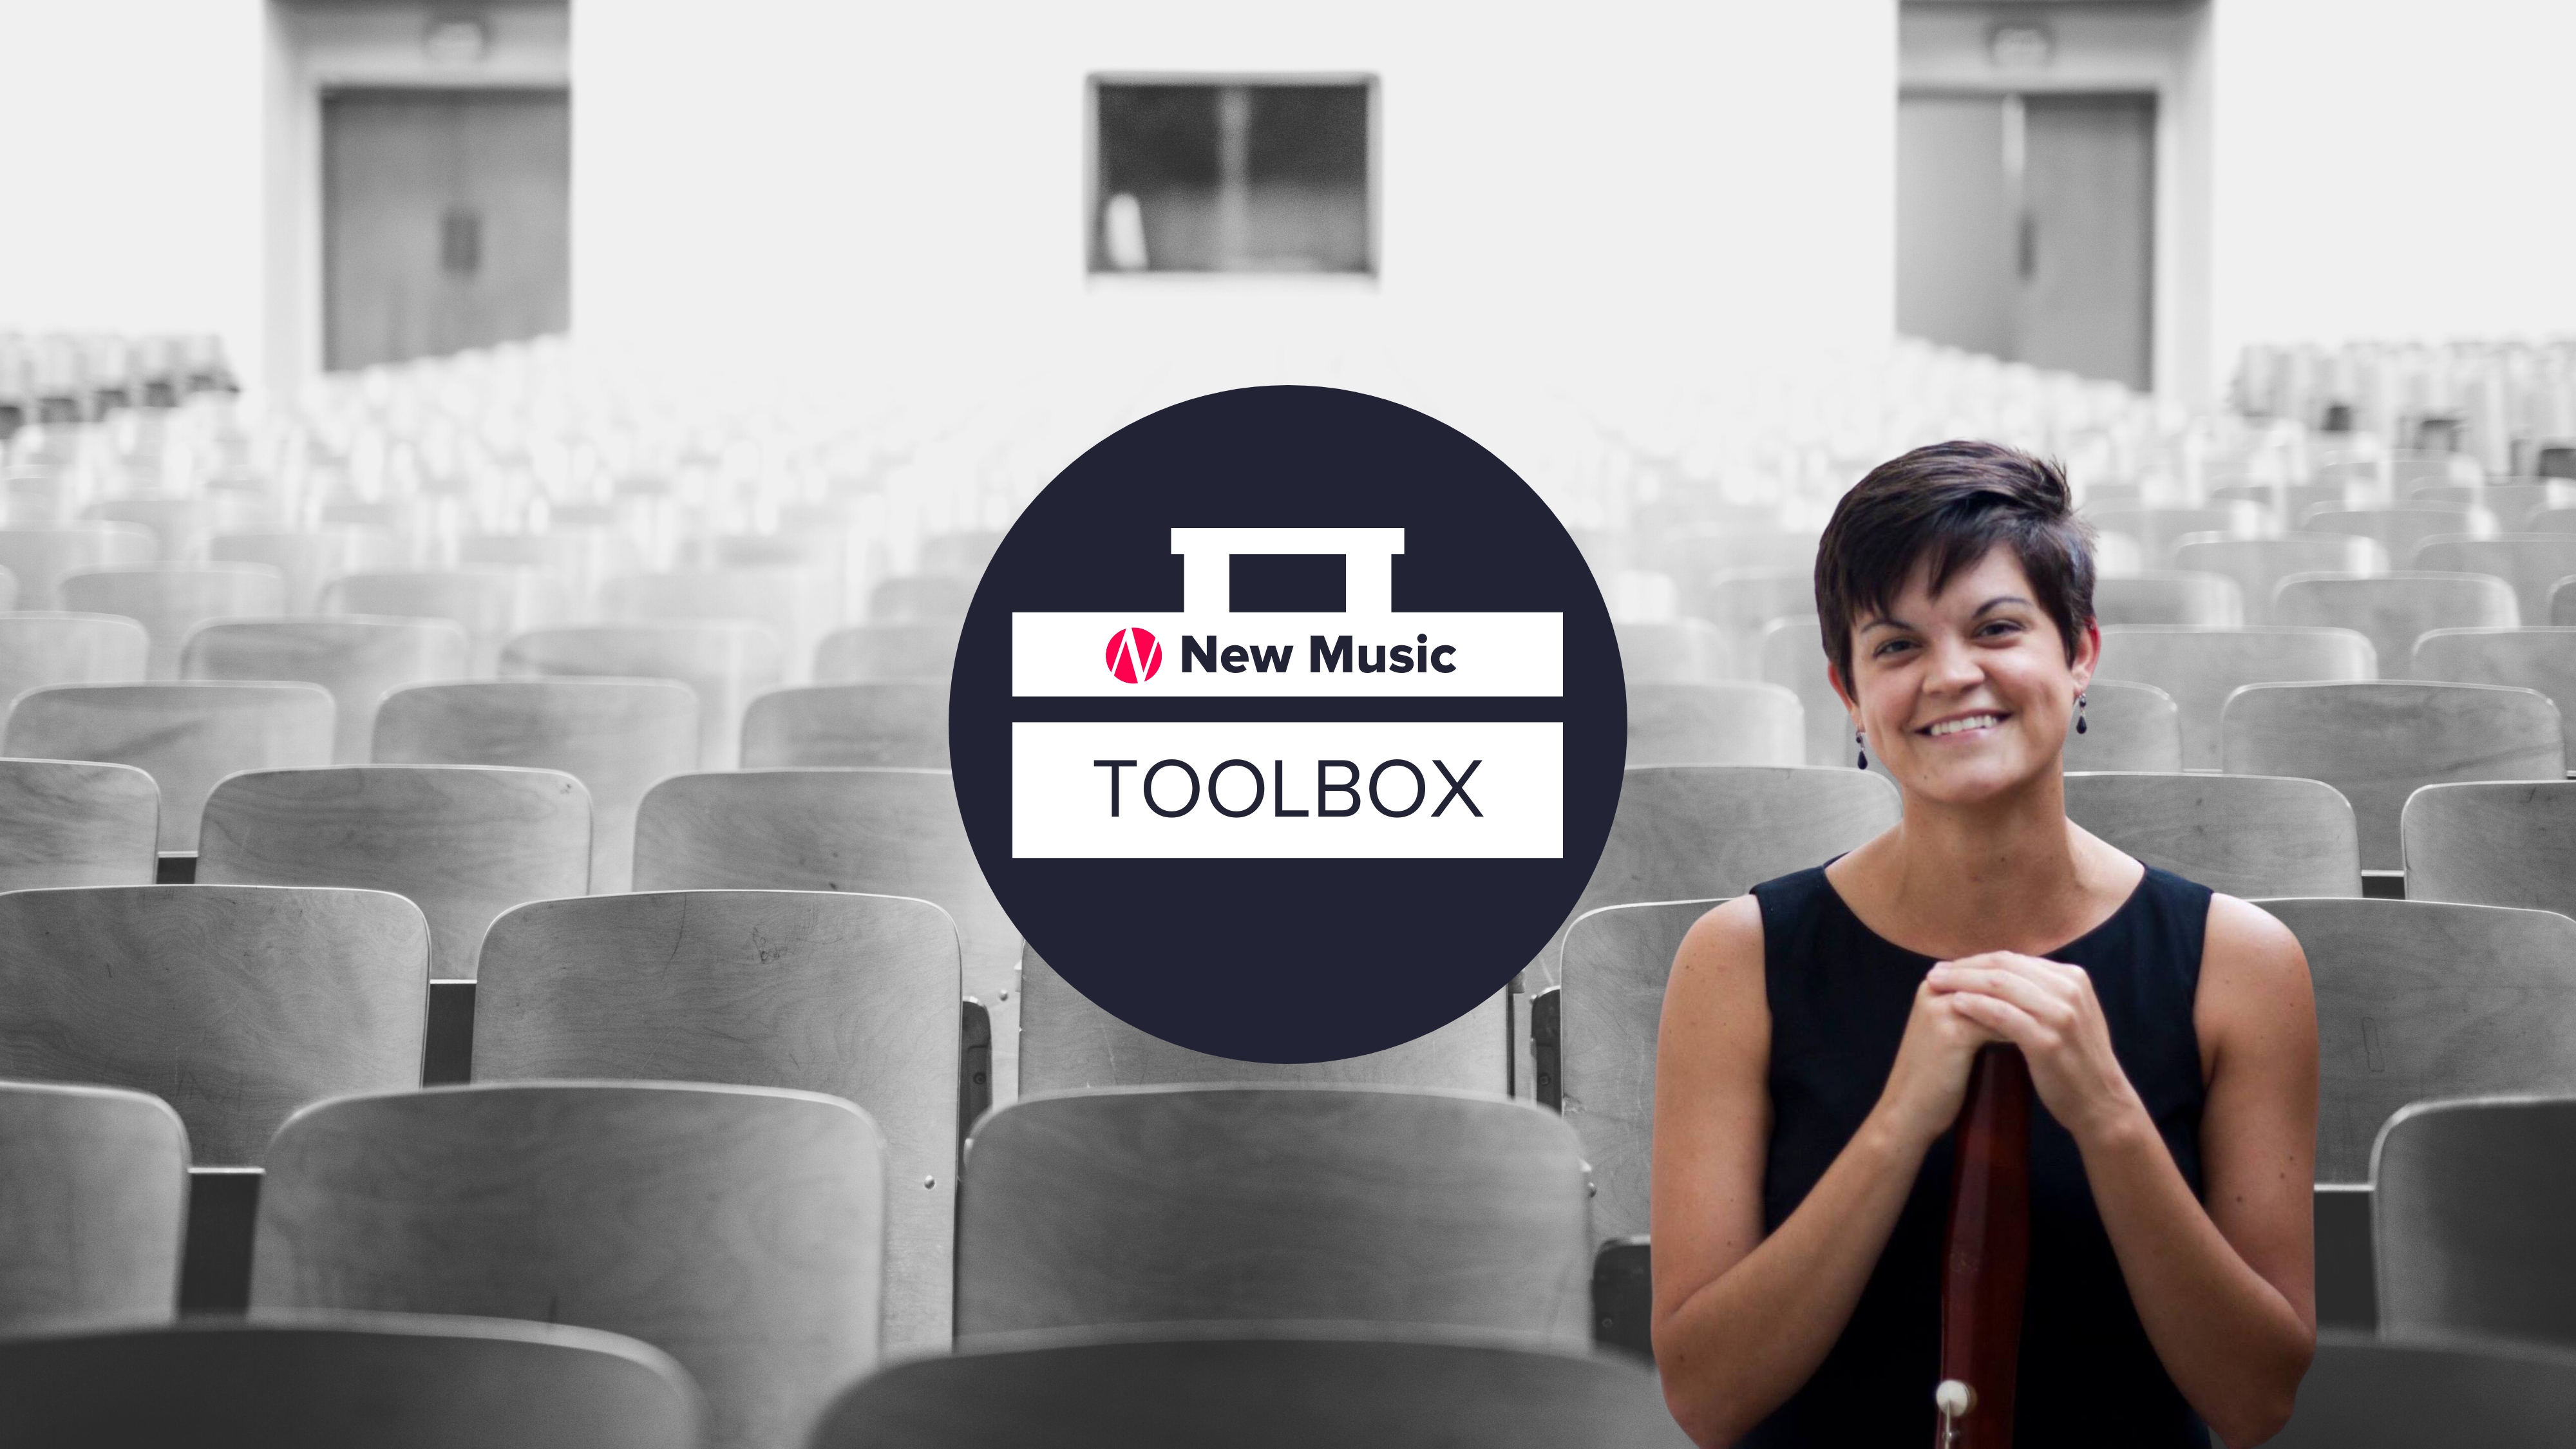 Cayla Bellamy sitting in an empty classroom with an overlay of the NMBx ToolBox banner